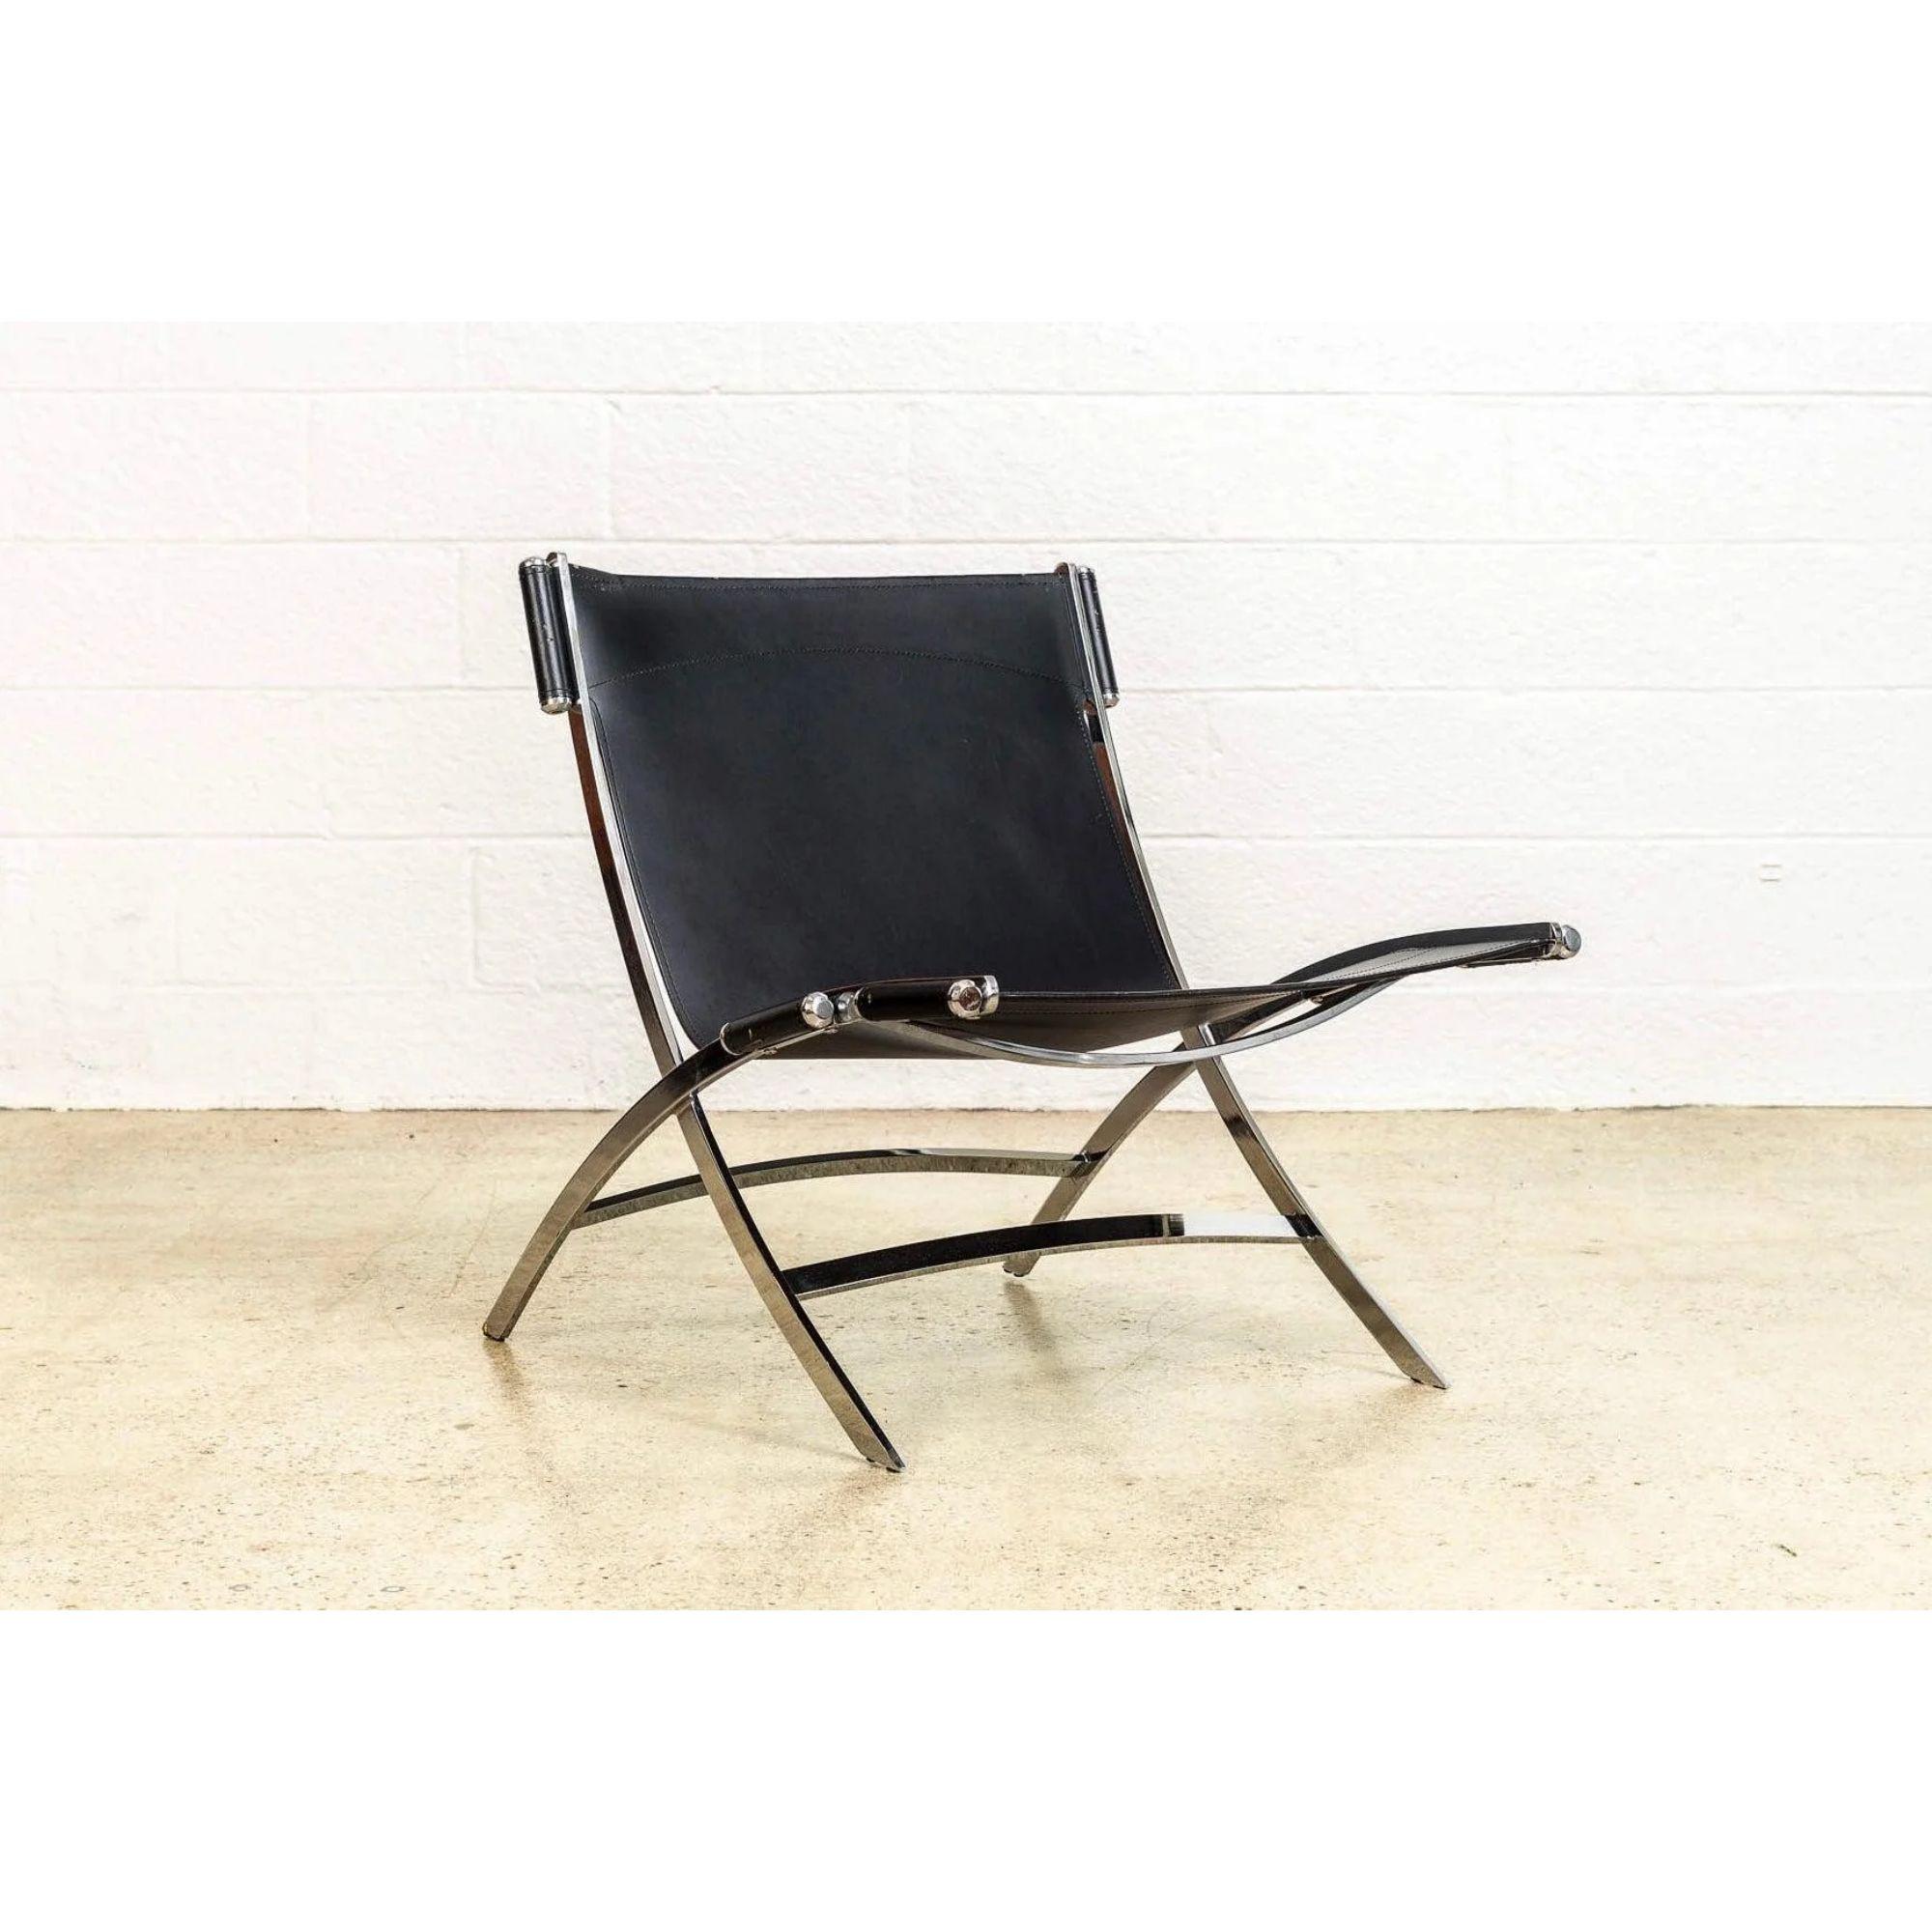 Postmodern Chrome & Black Leather Timeless Lounge Chairs by Antonio Citterio For Sale 2